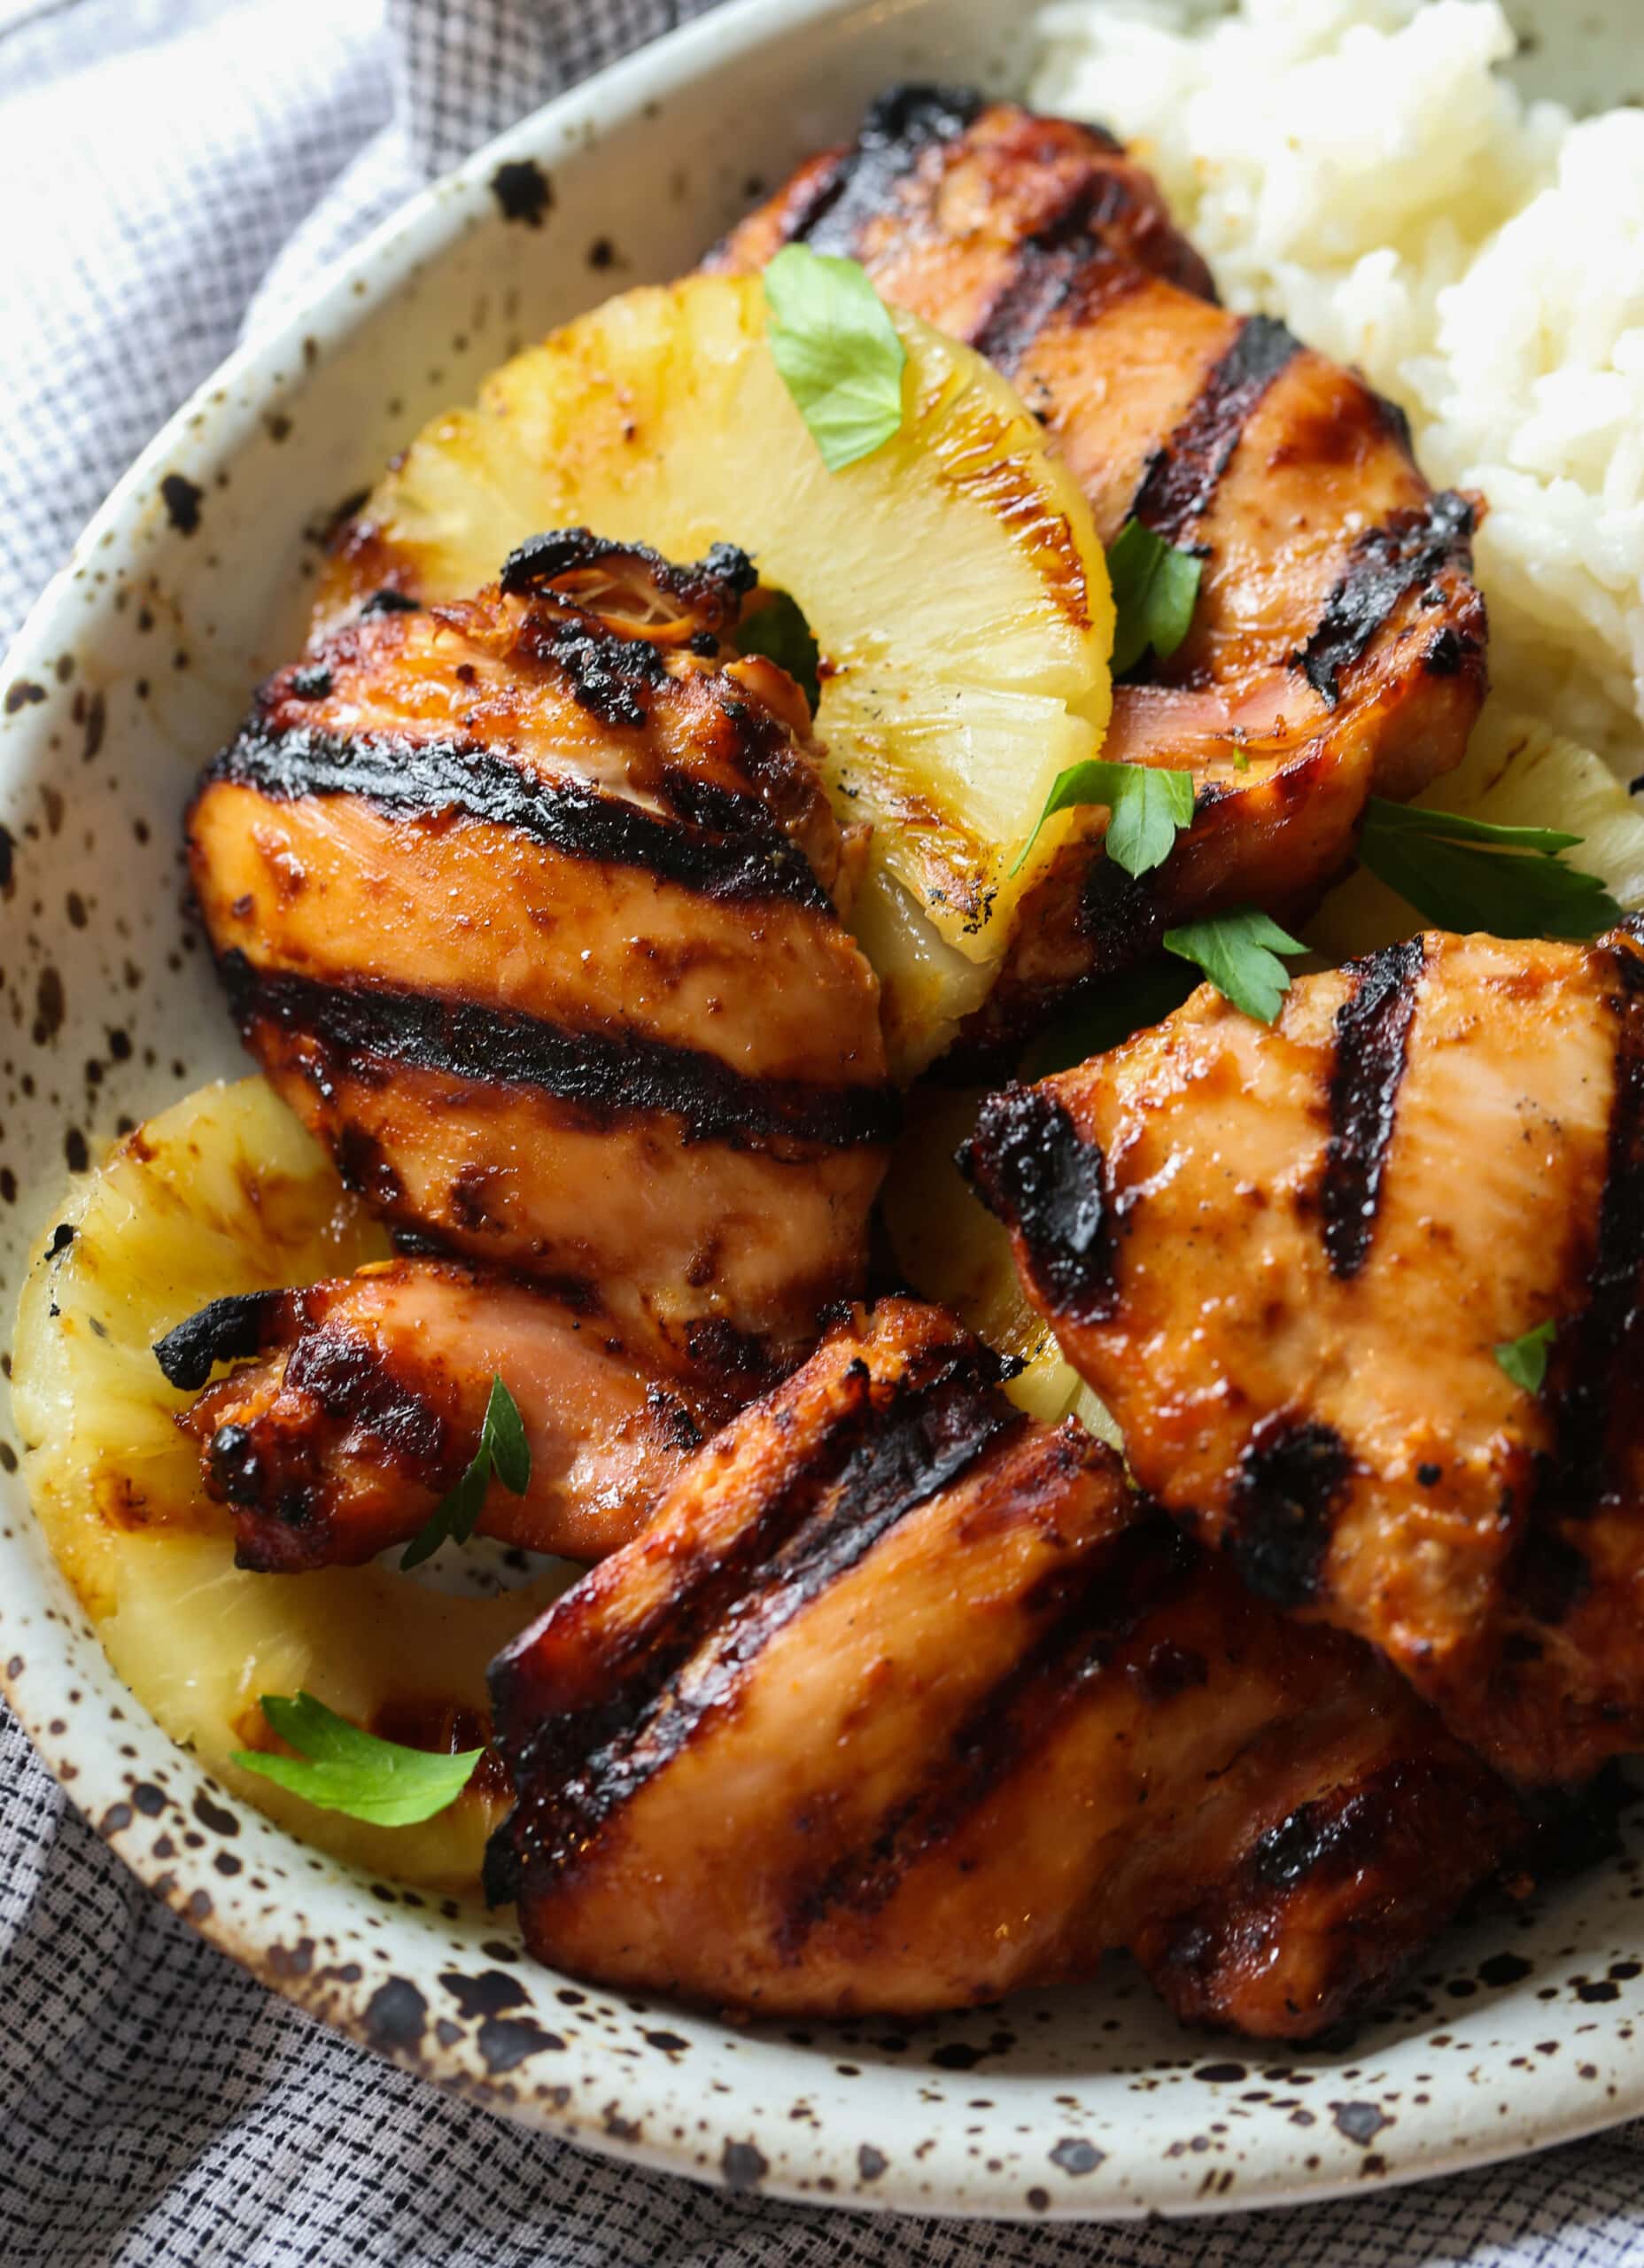 Hawaiian Huli Huli chicken served in a bowl with grilled pineapple over rice.